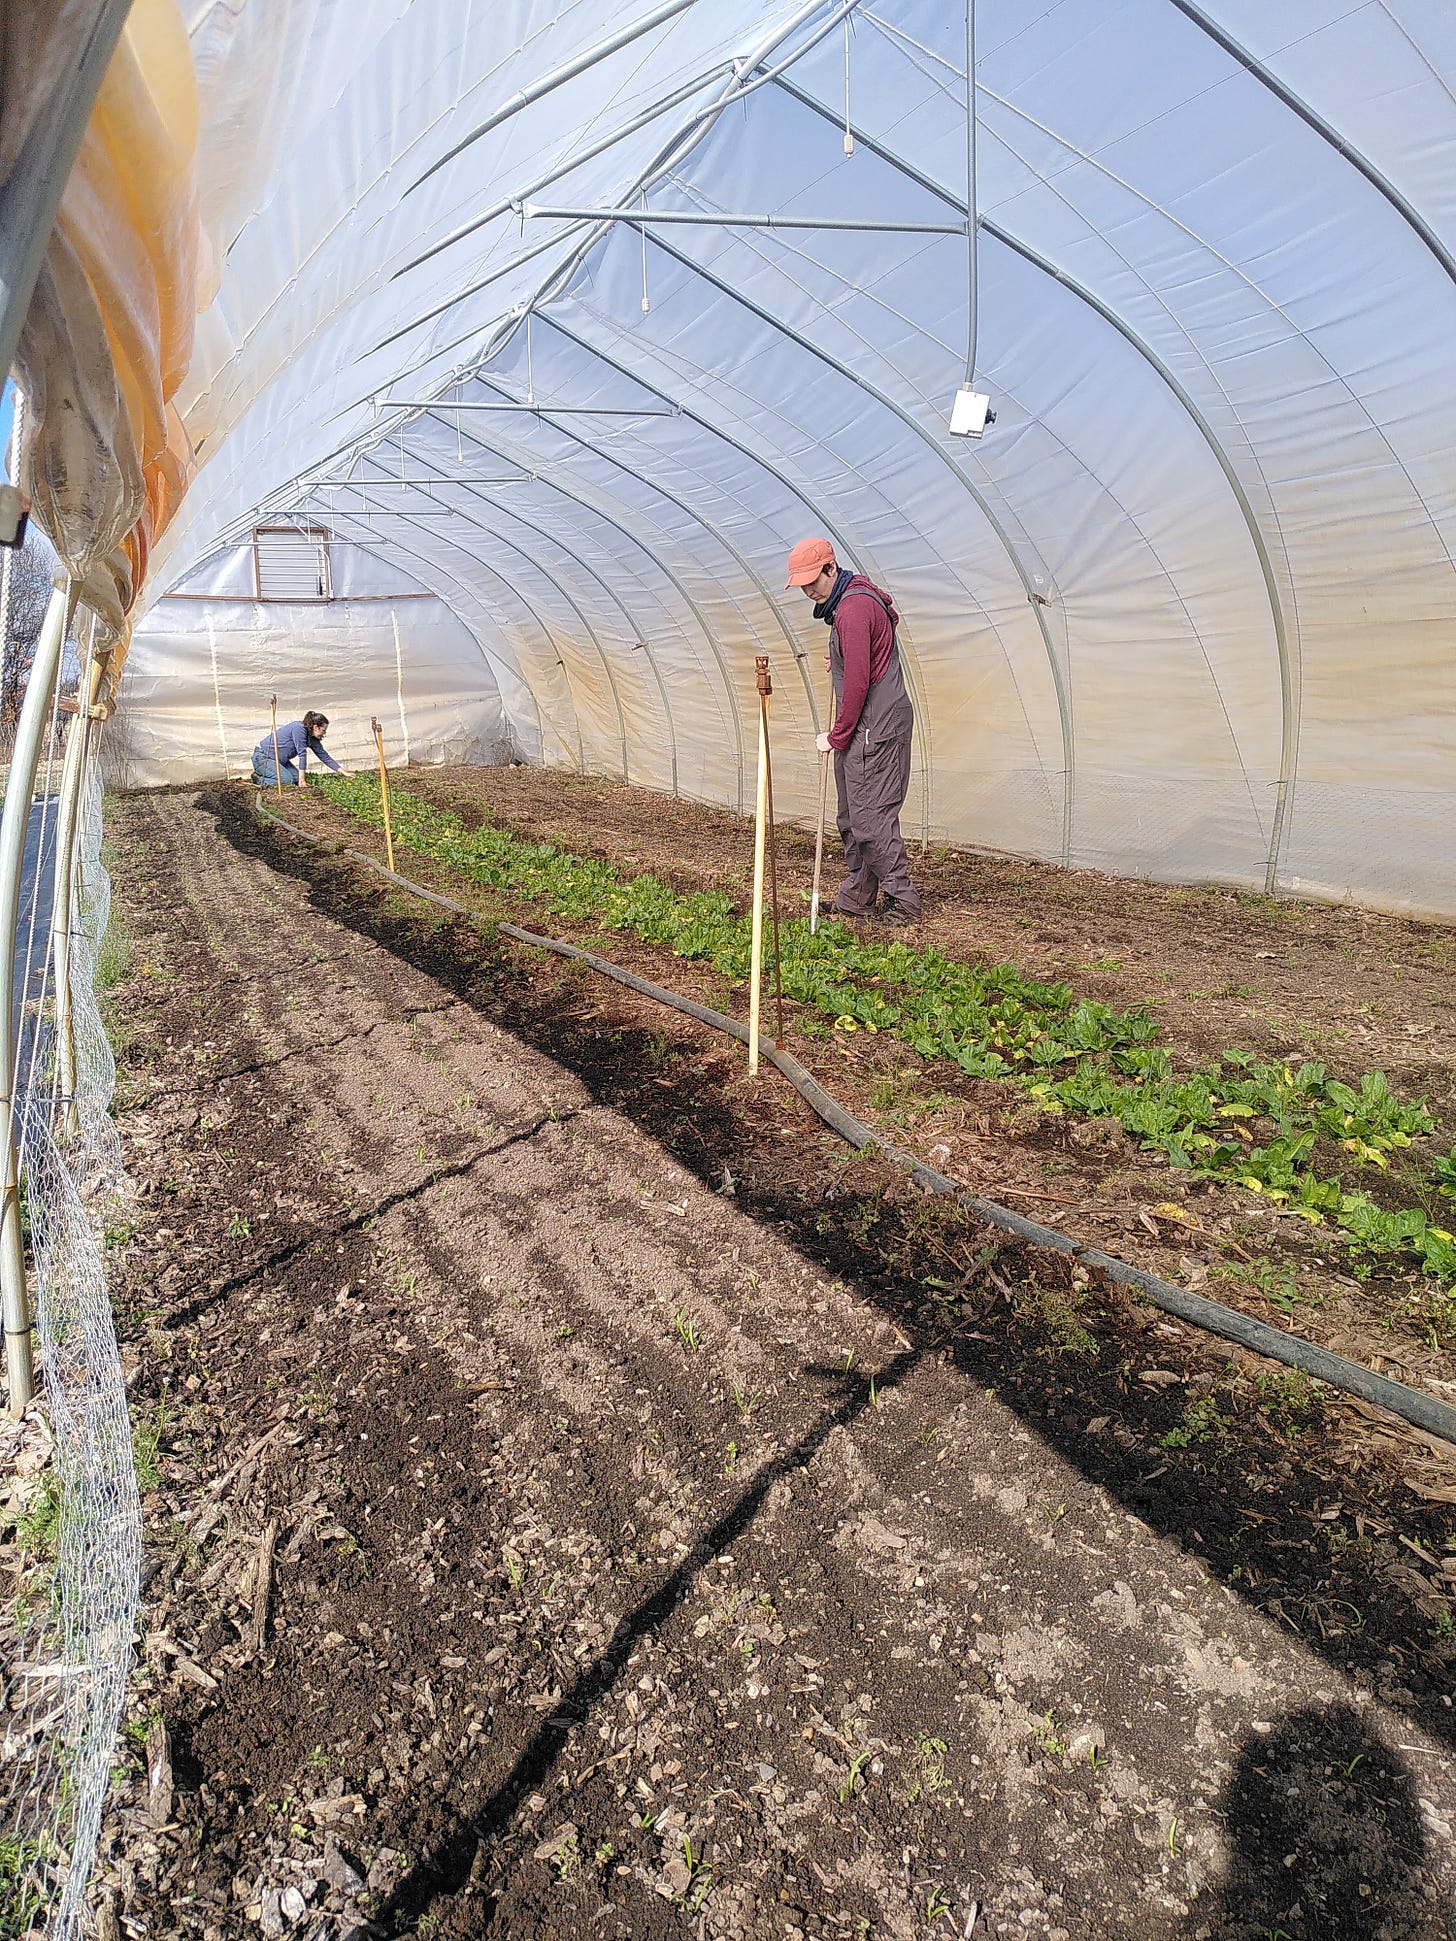 FArm workers weeding spinache beds in a plastic poly-tunnel